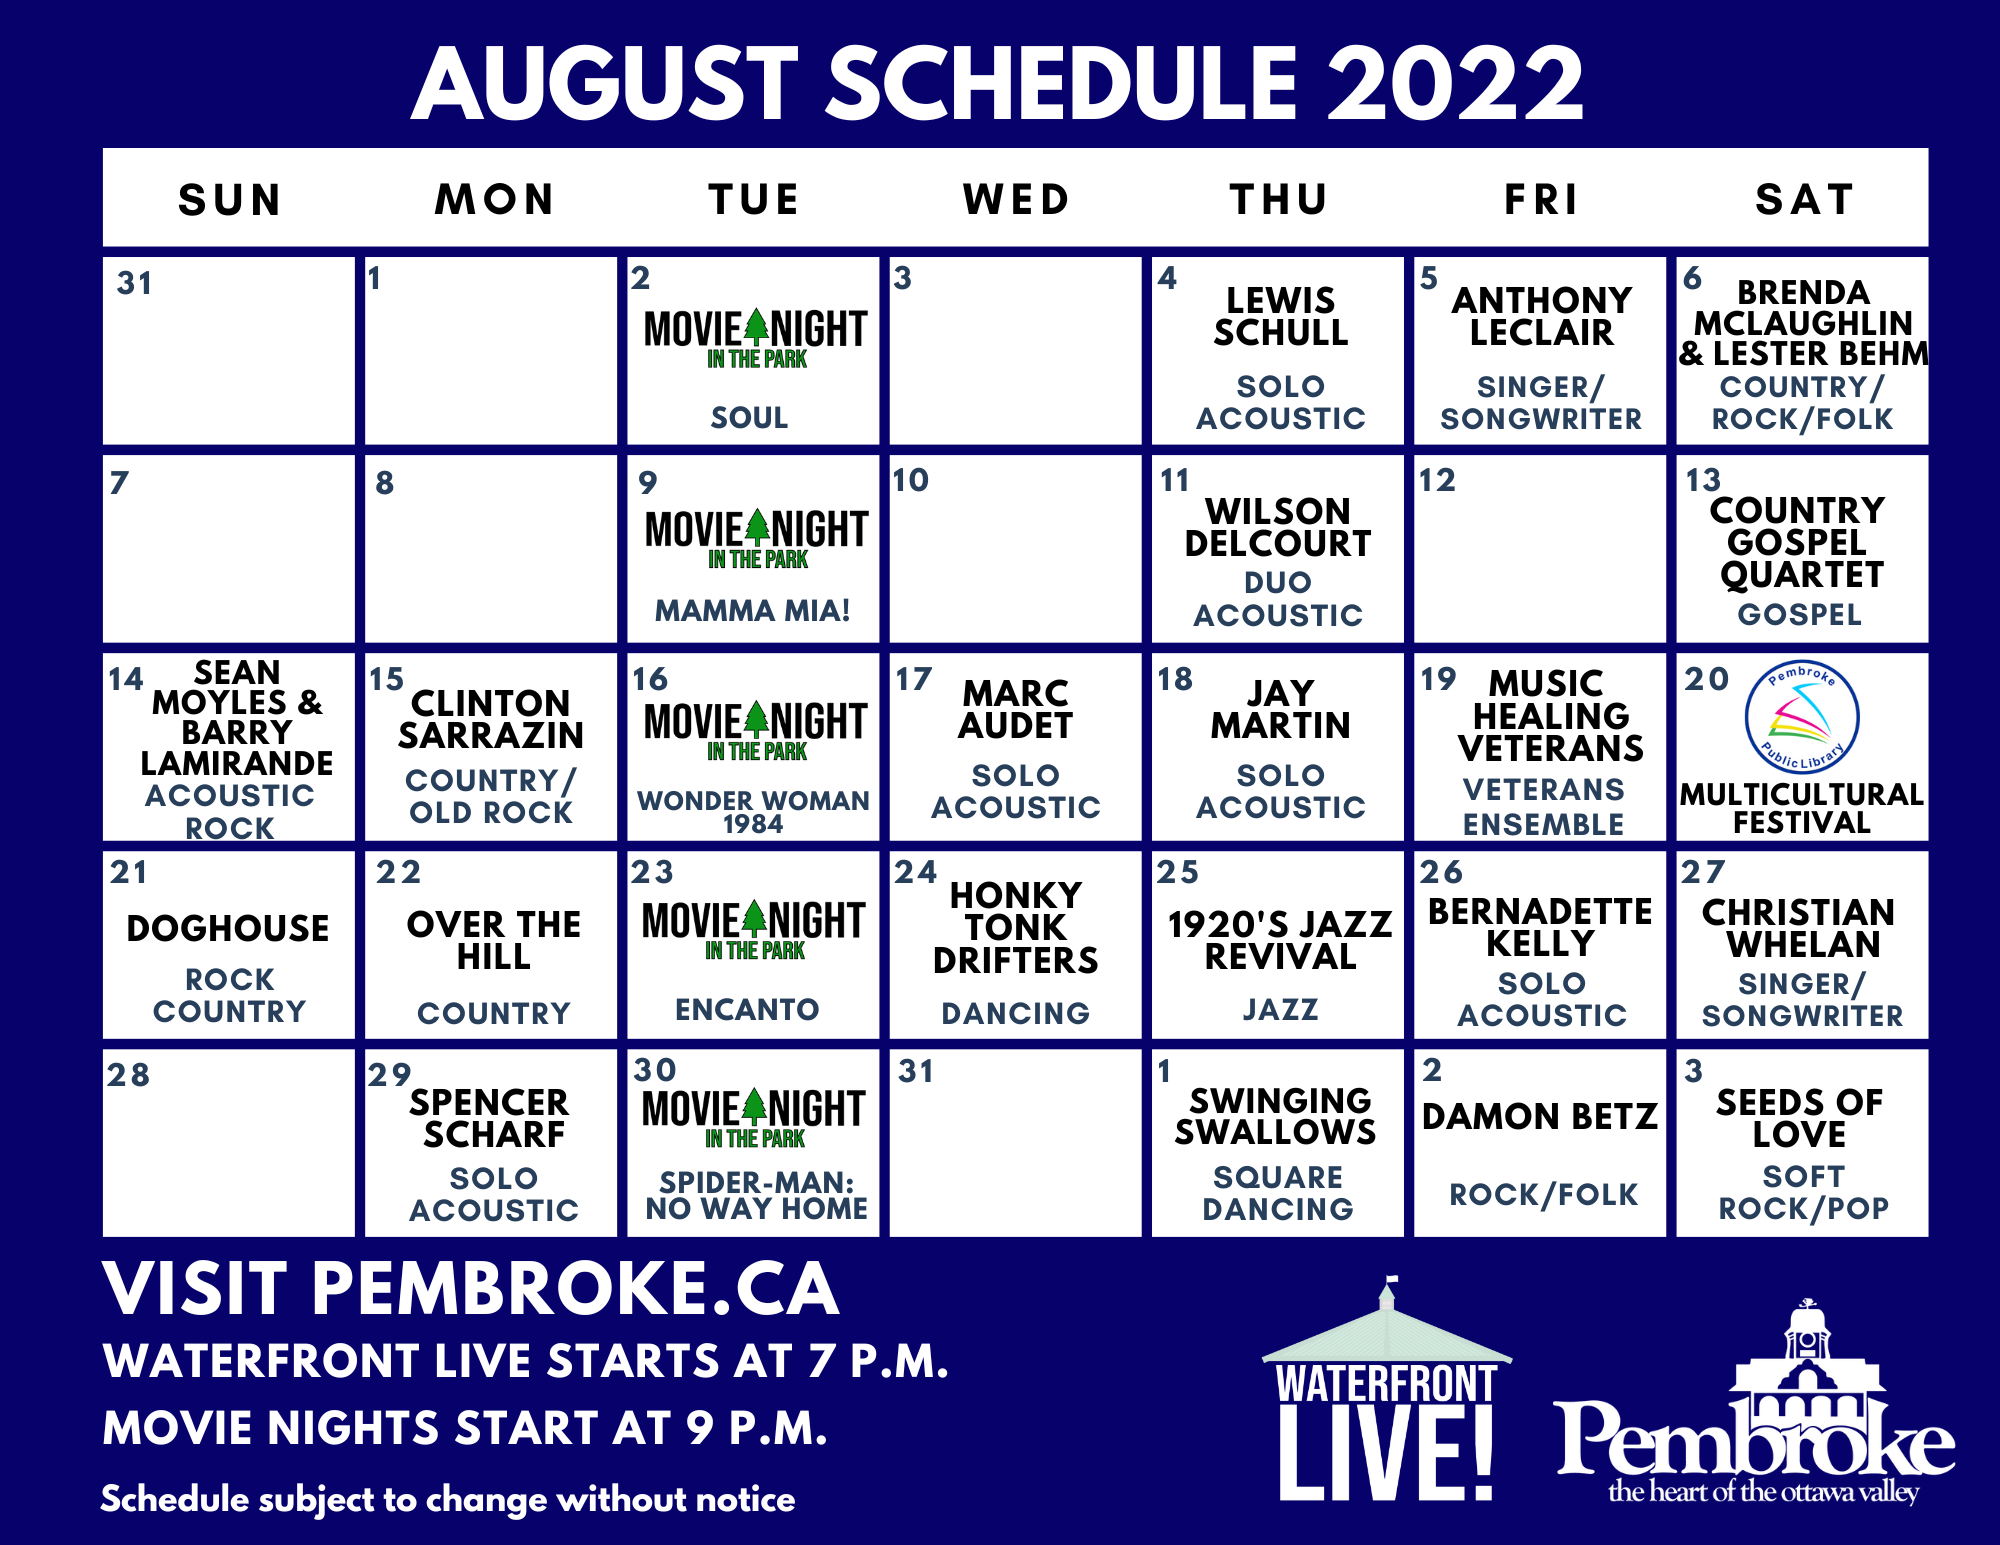 A calendar for the month of August showing what performers are performing each night at Waterfront Live.